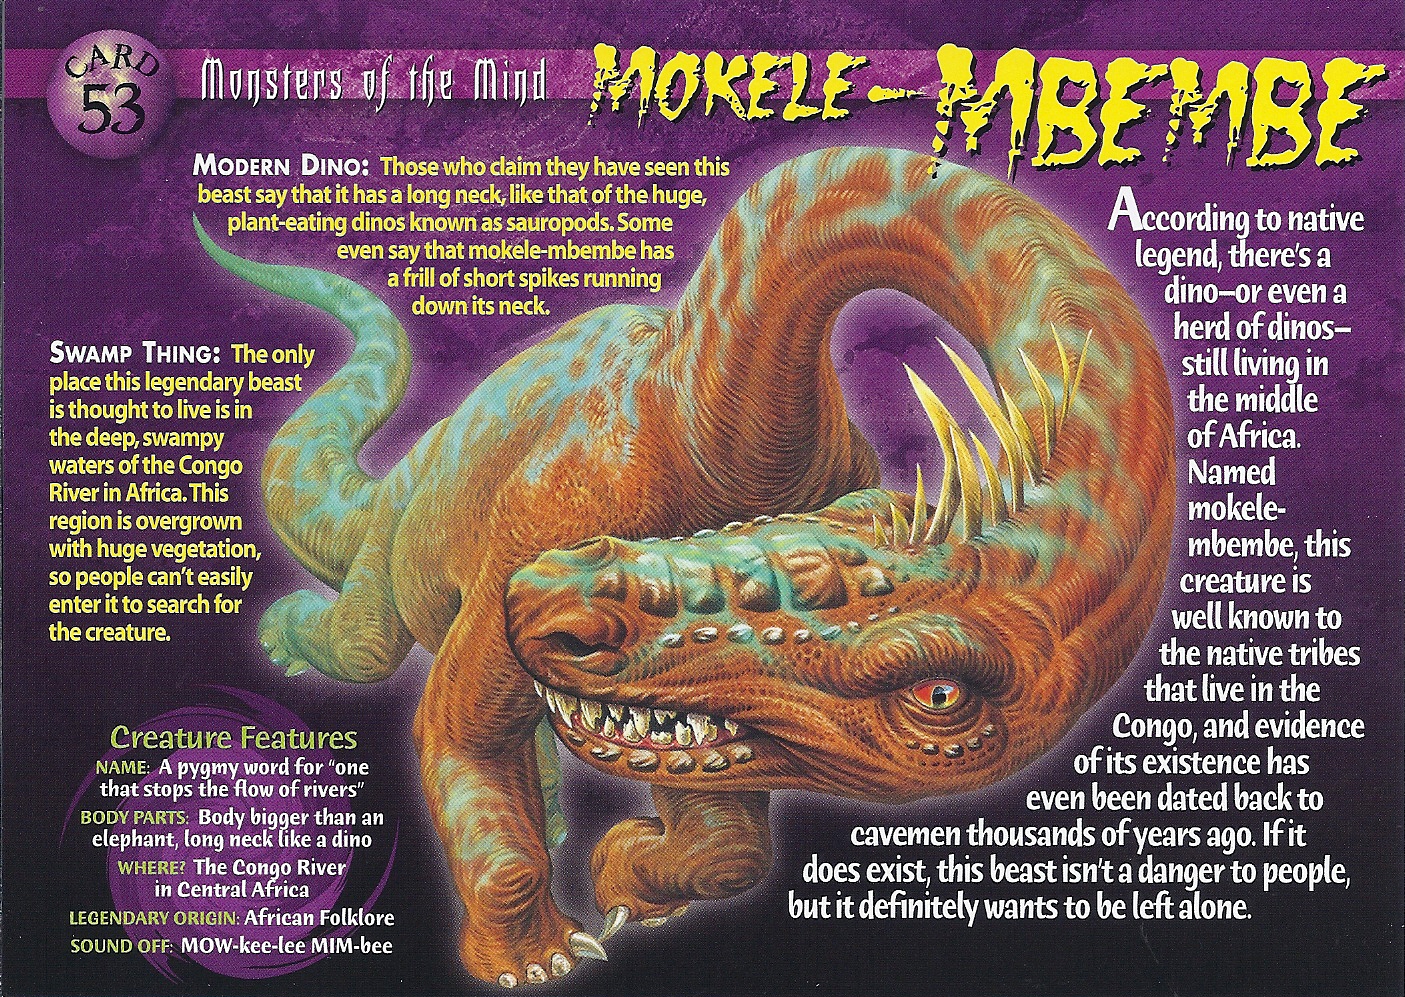 The Mokele-mbembe: The Monster of the Congo River